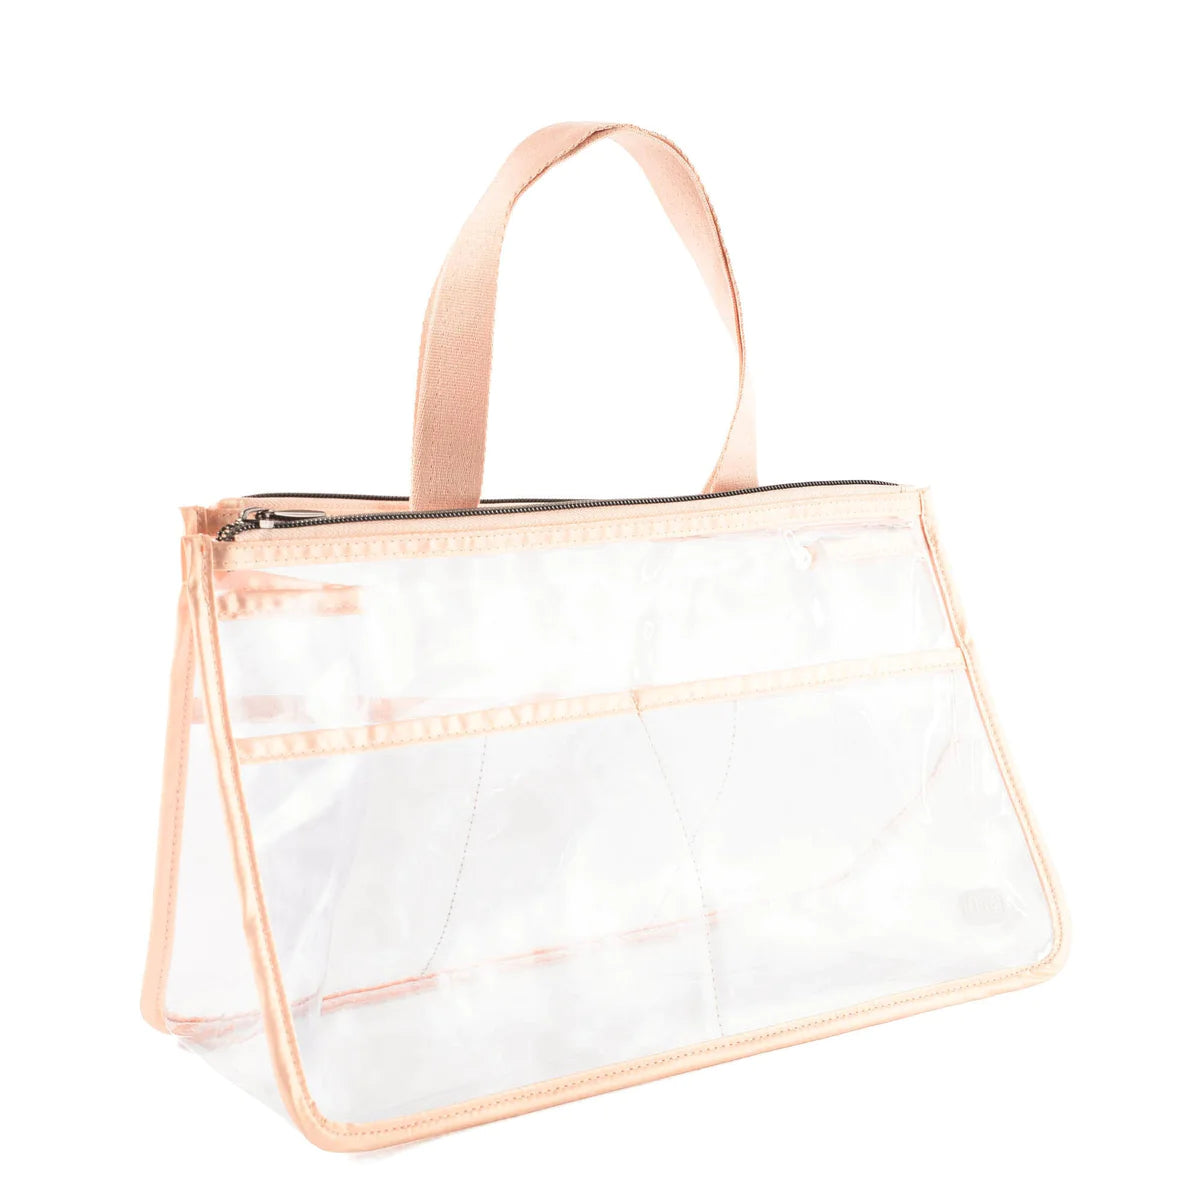 LUG Catcher Clearview Cosmetic Bag in Metallic Rose Gold